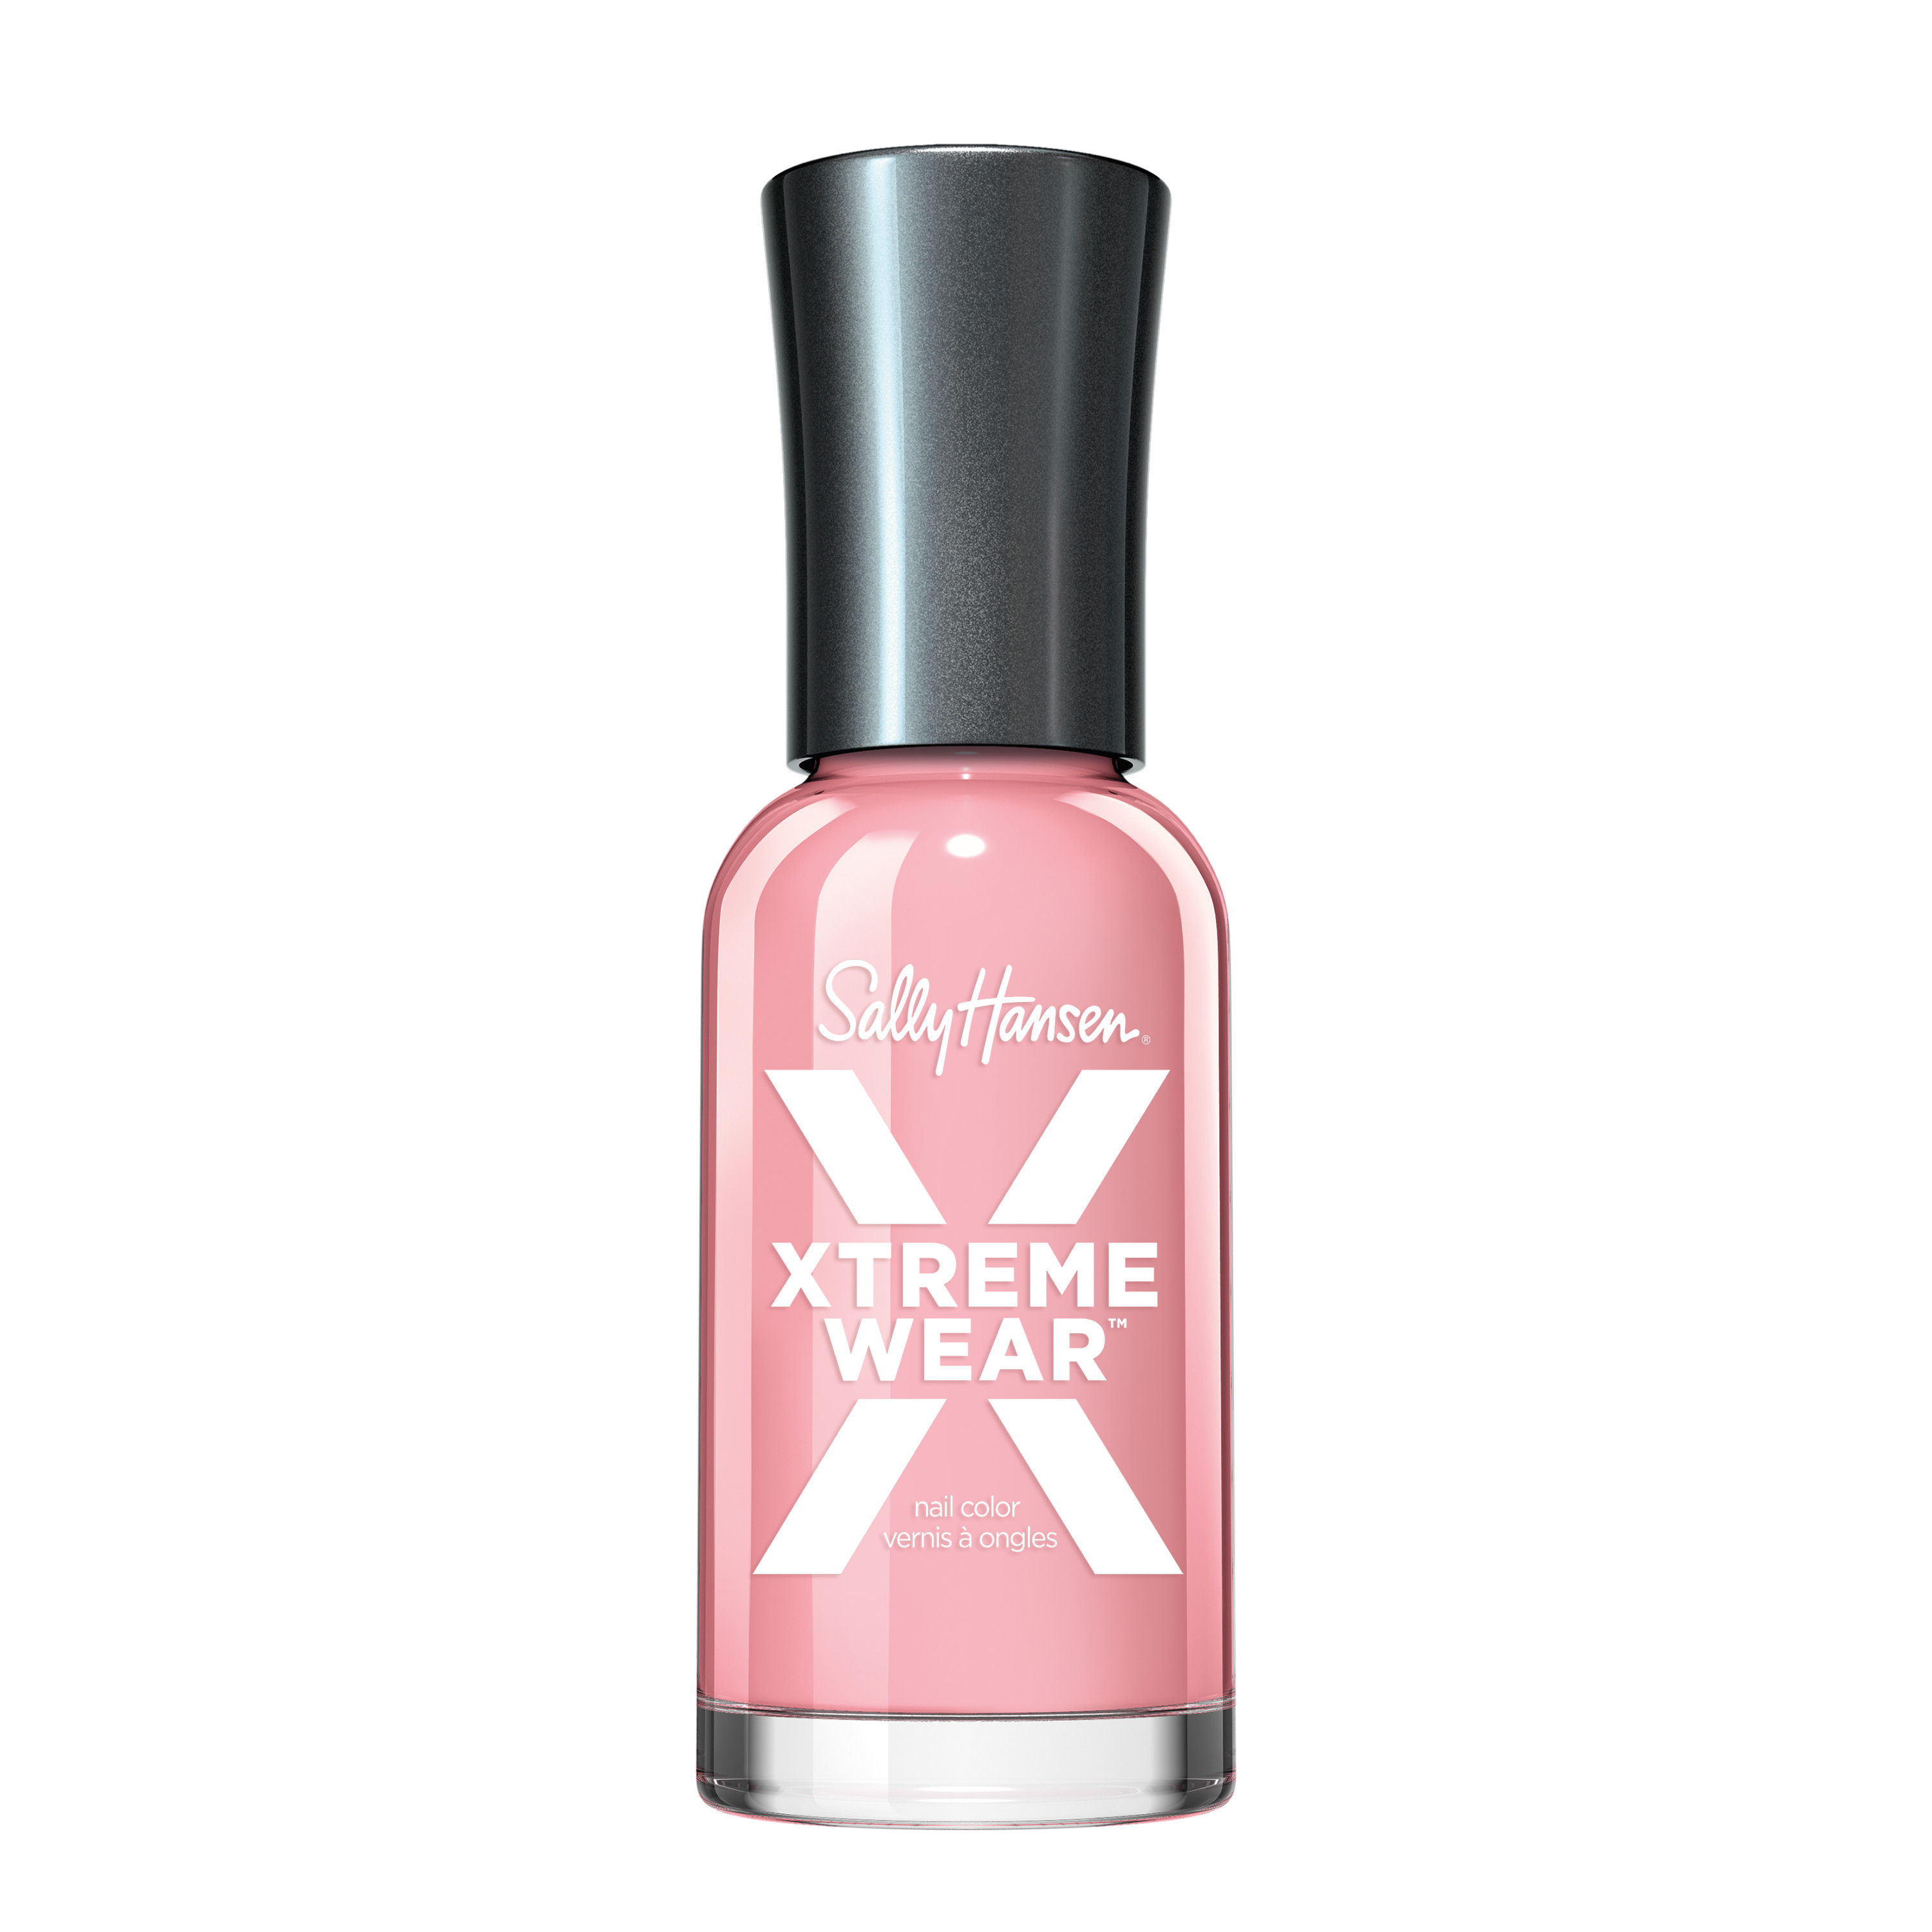 Sally Hansen Hard As Nails Xtreme Wear Nail Color: Buy Sally Hansen Hard As  Nails Xtreme Wear Nail Color Online at Best Price in India | Nykaa